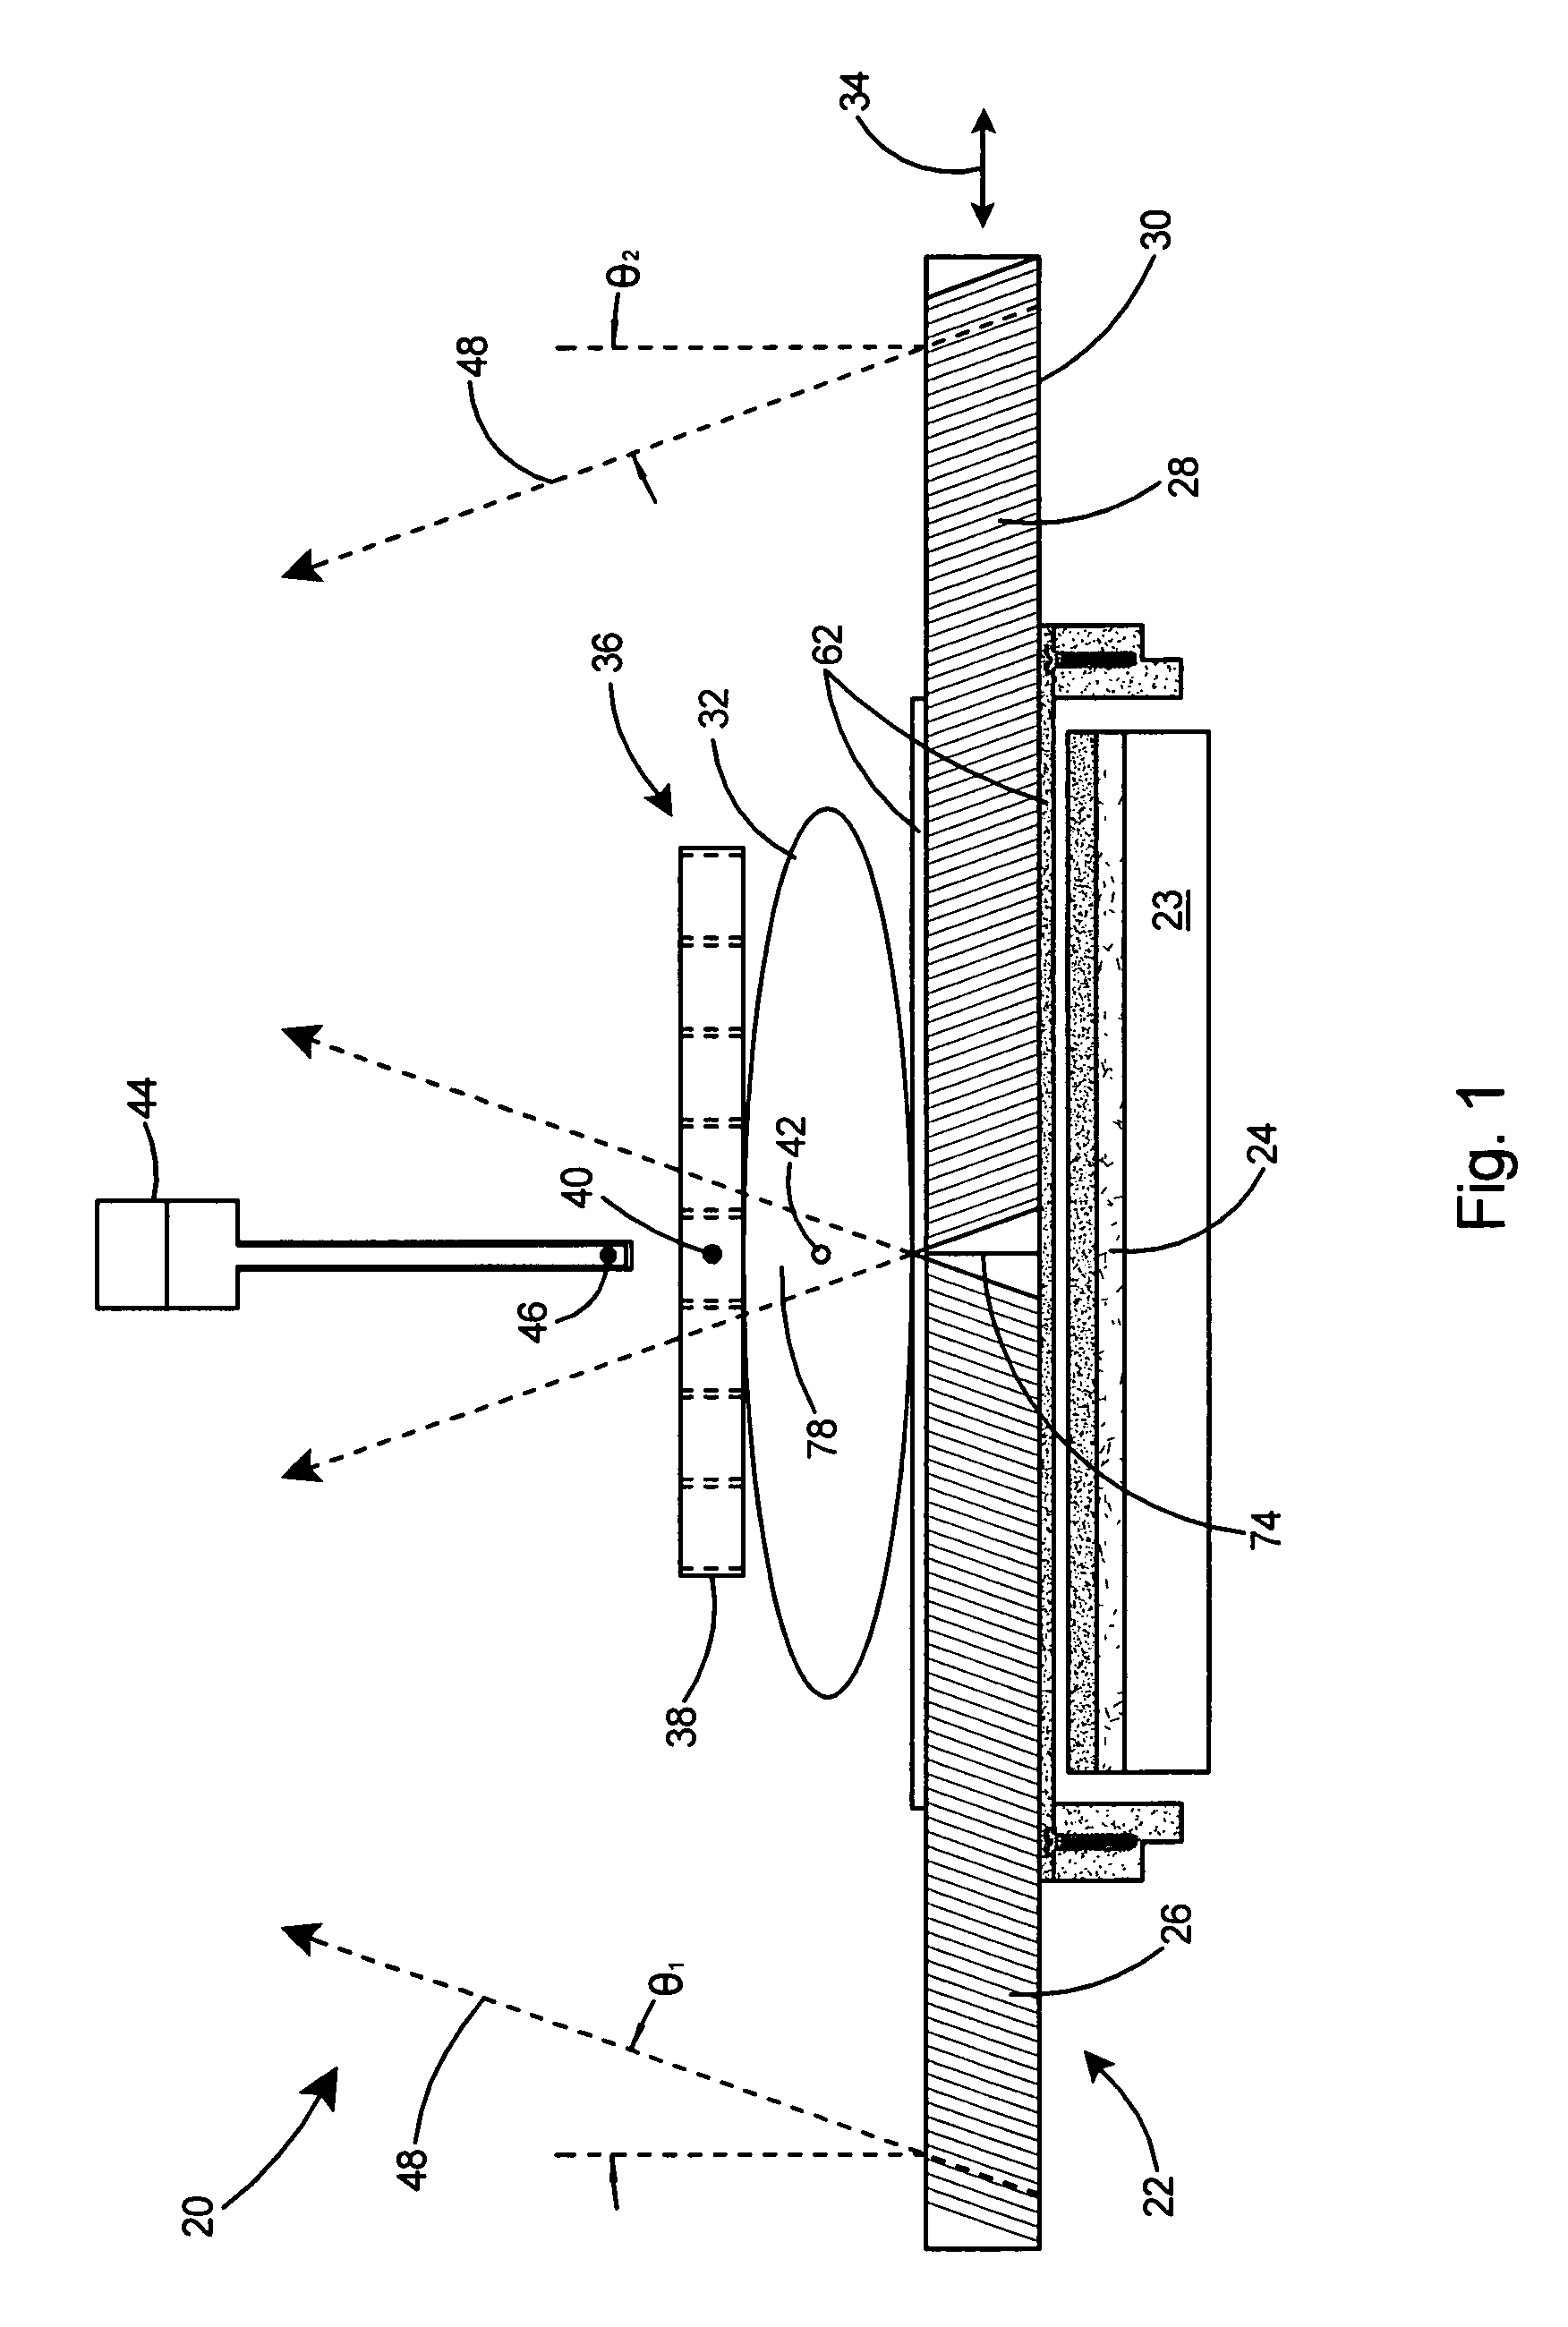 Fiducial marker and method for gamma guided stereotactic localization